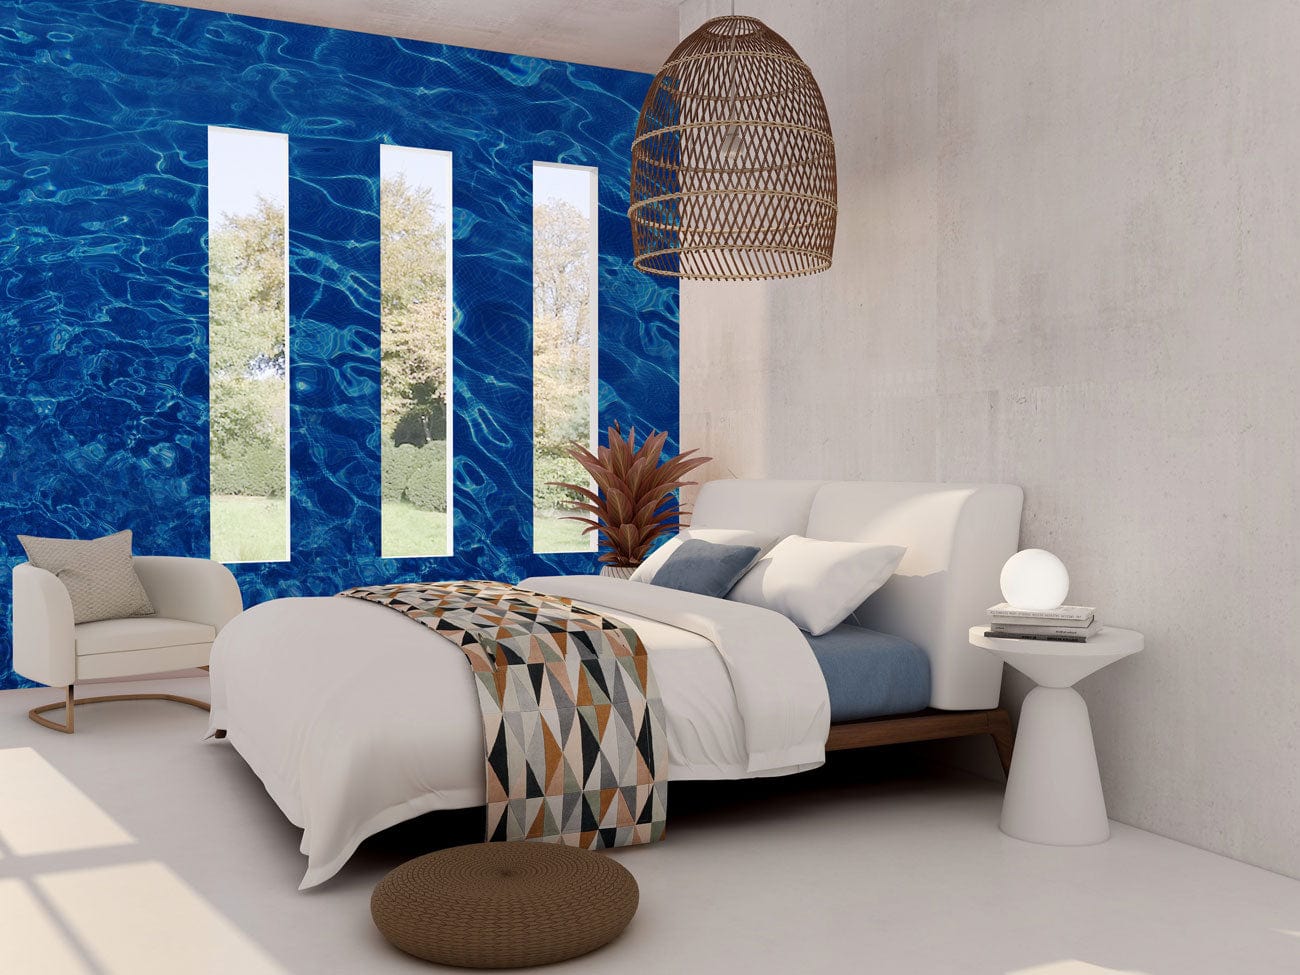 Wallpaper mural of ocean waves for use in decorating a bedroom